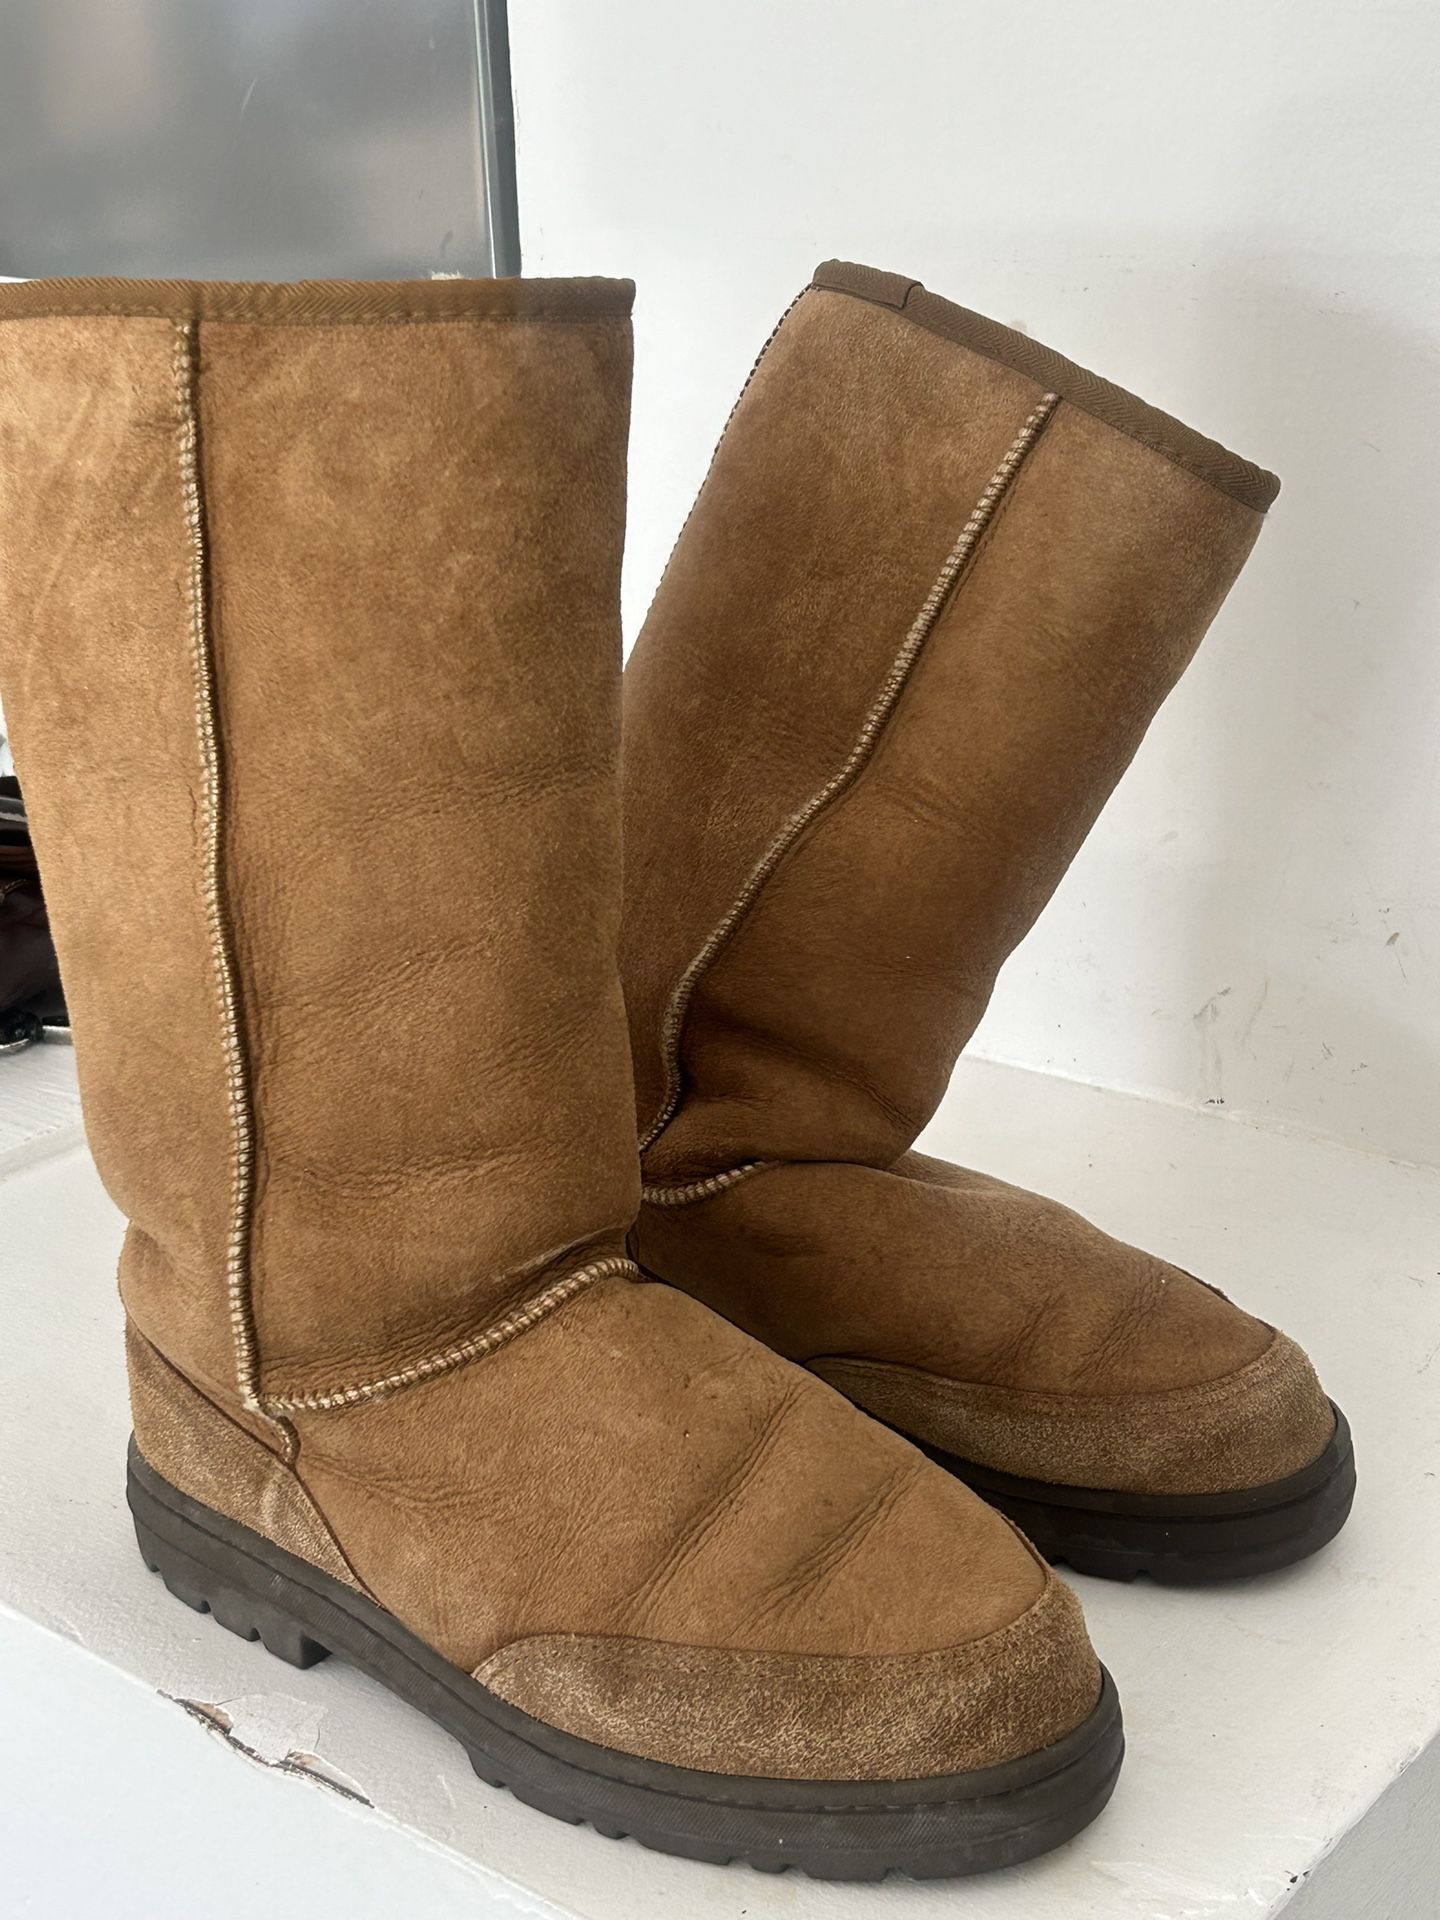 UGG suede lined boots, women size 9